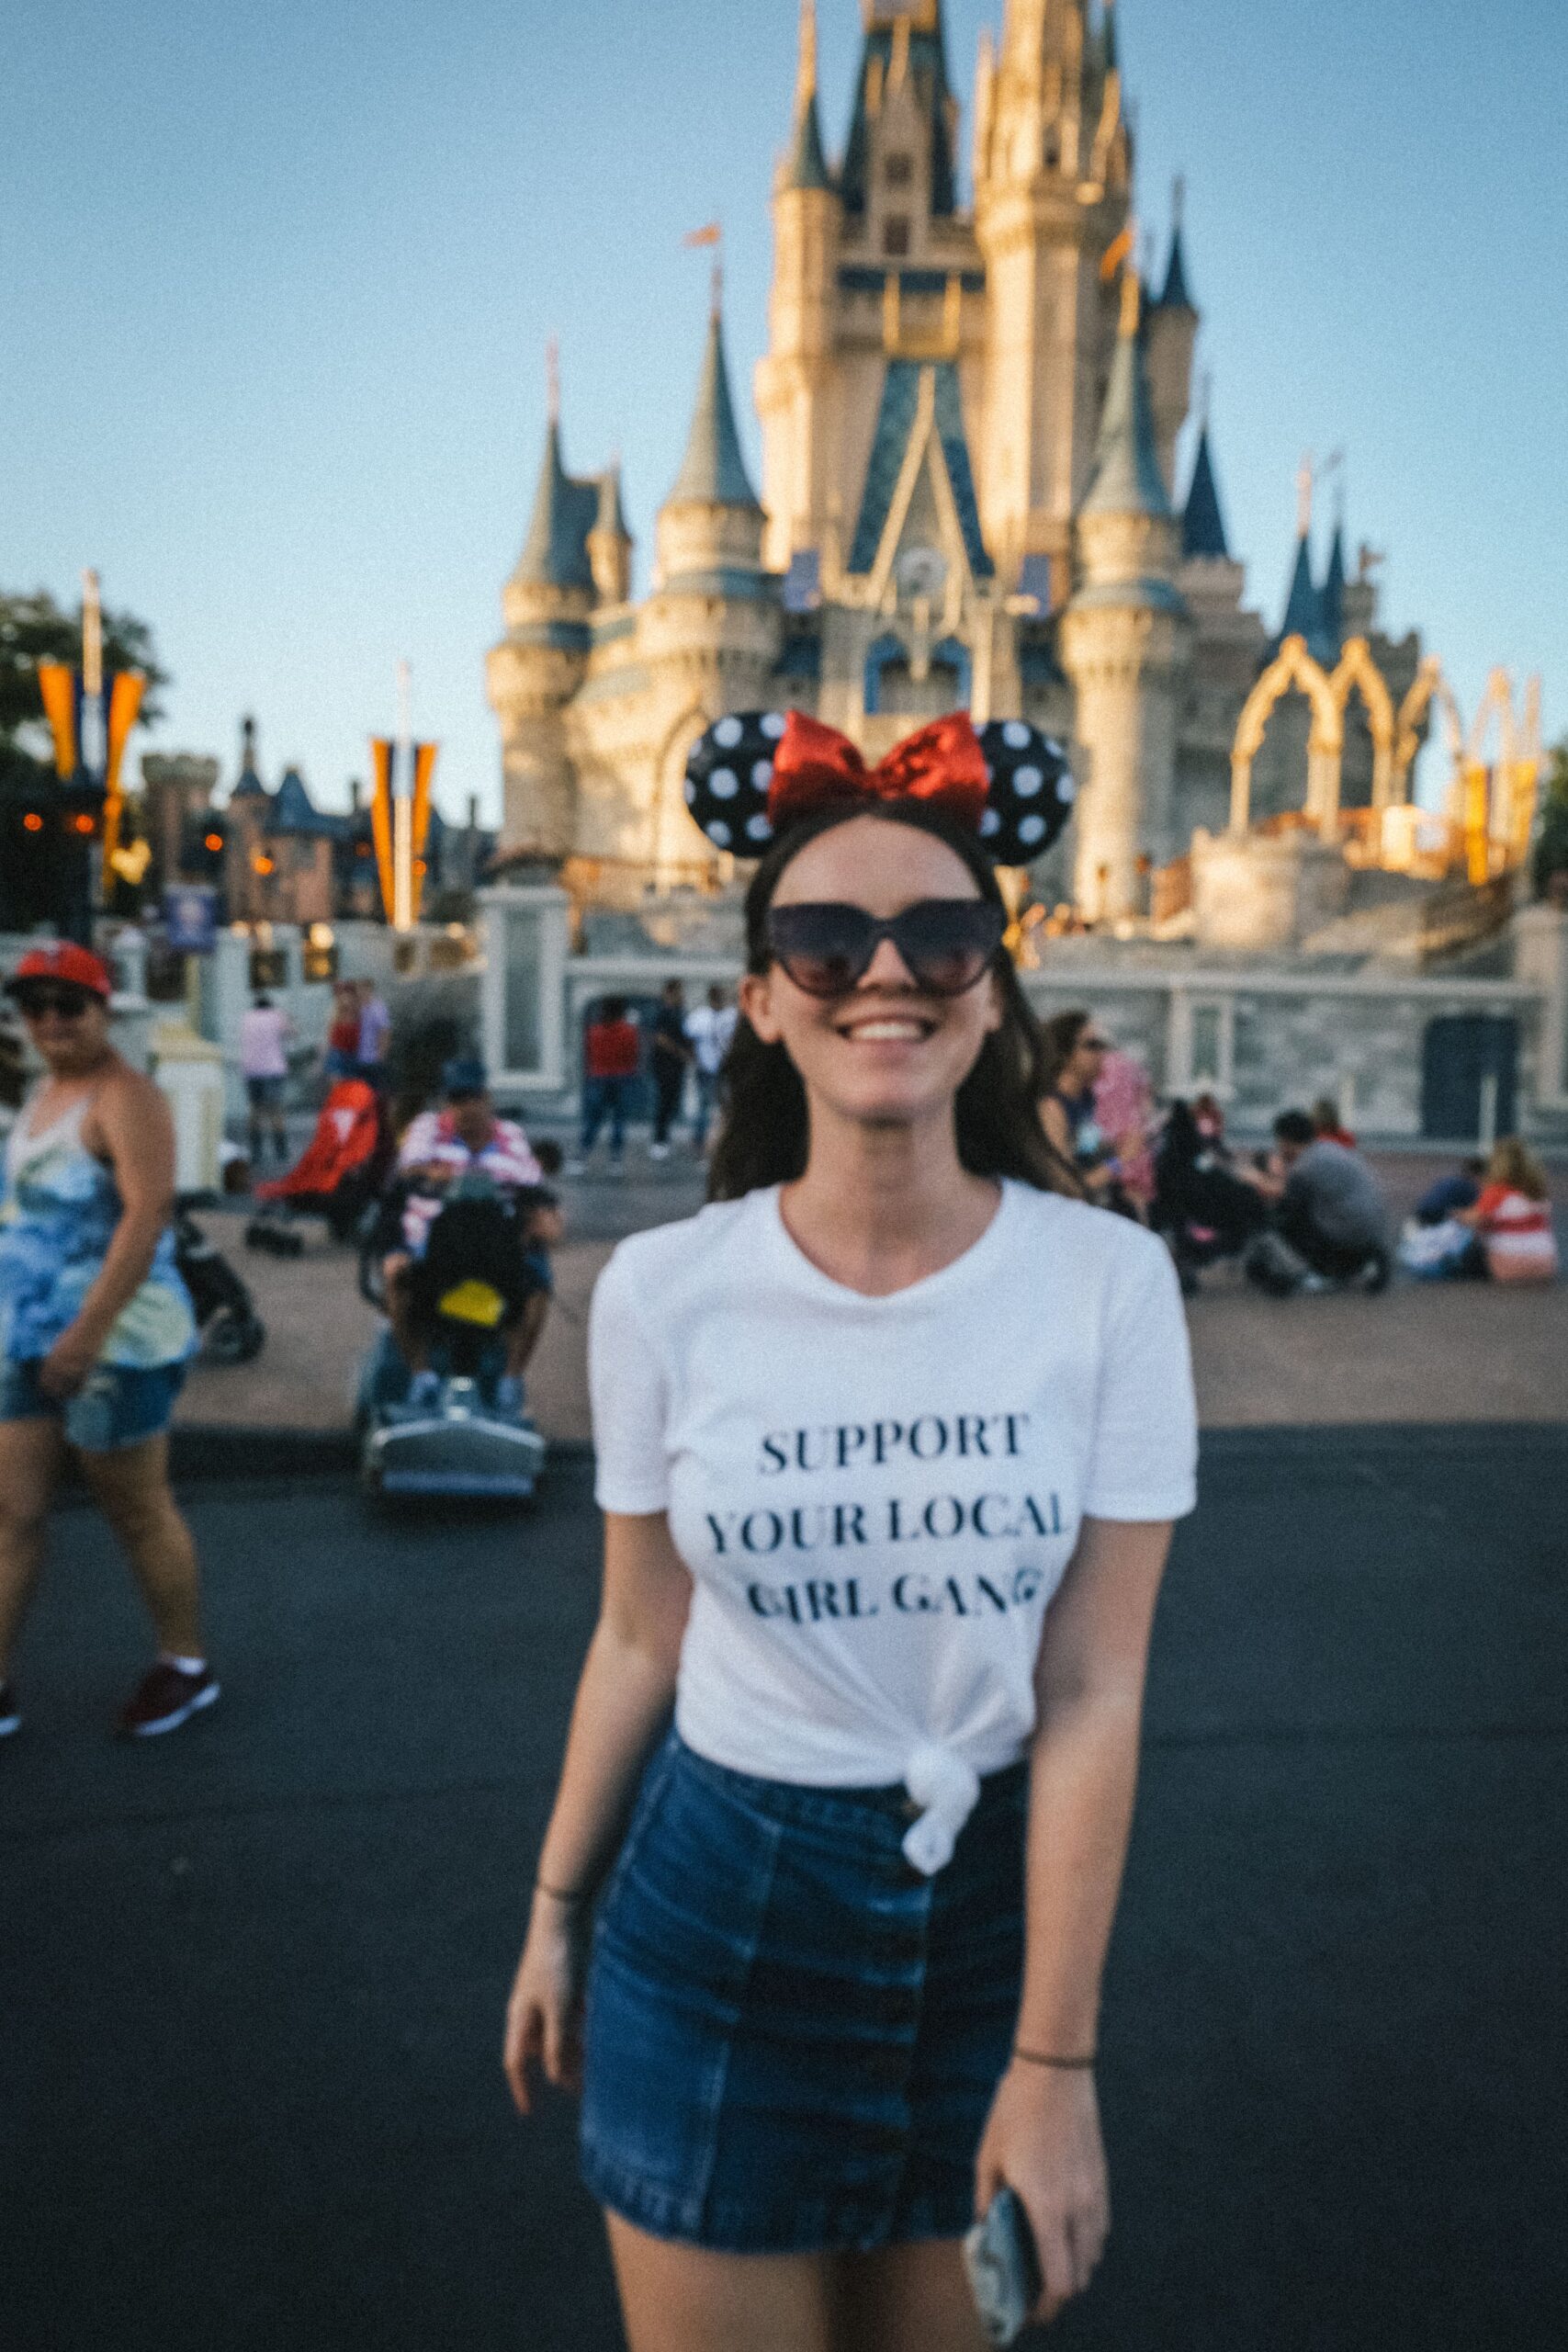 Holly in front of the Magic Kingdom Castle - Disney Hotels or International Drive